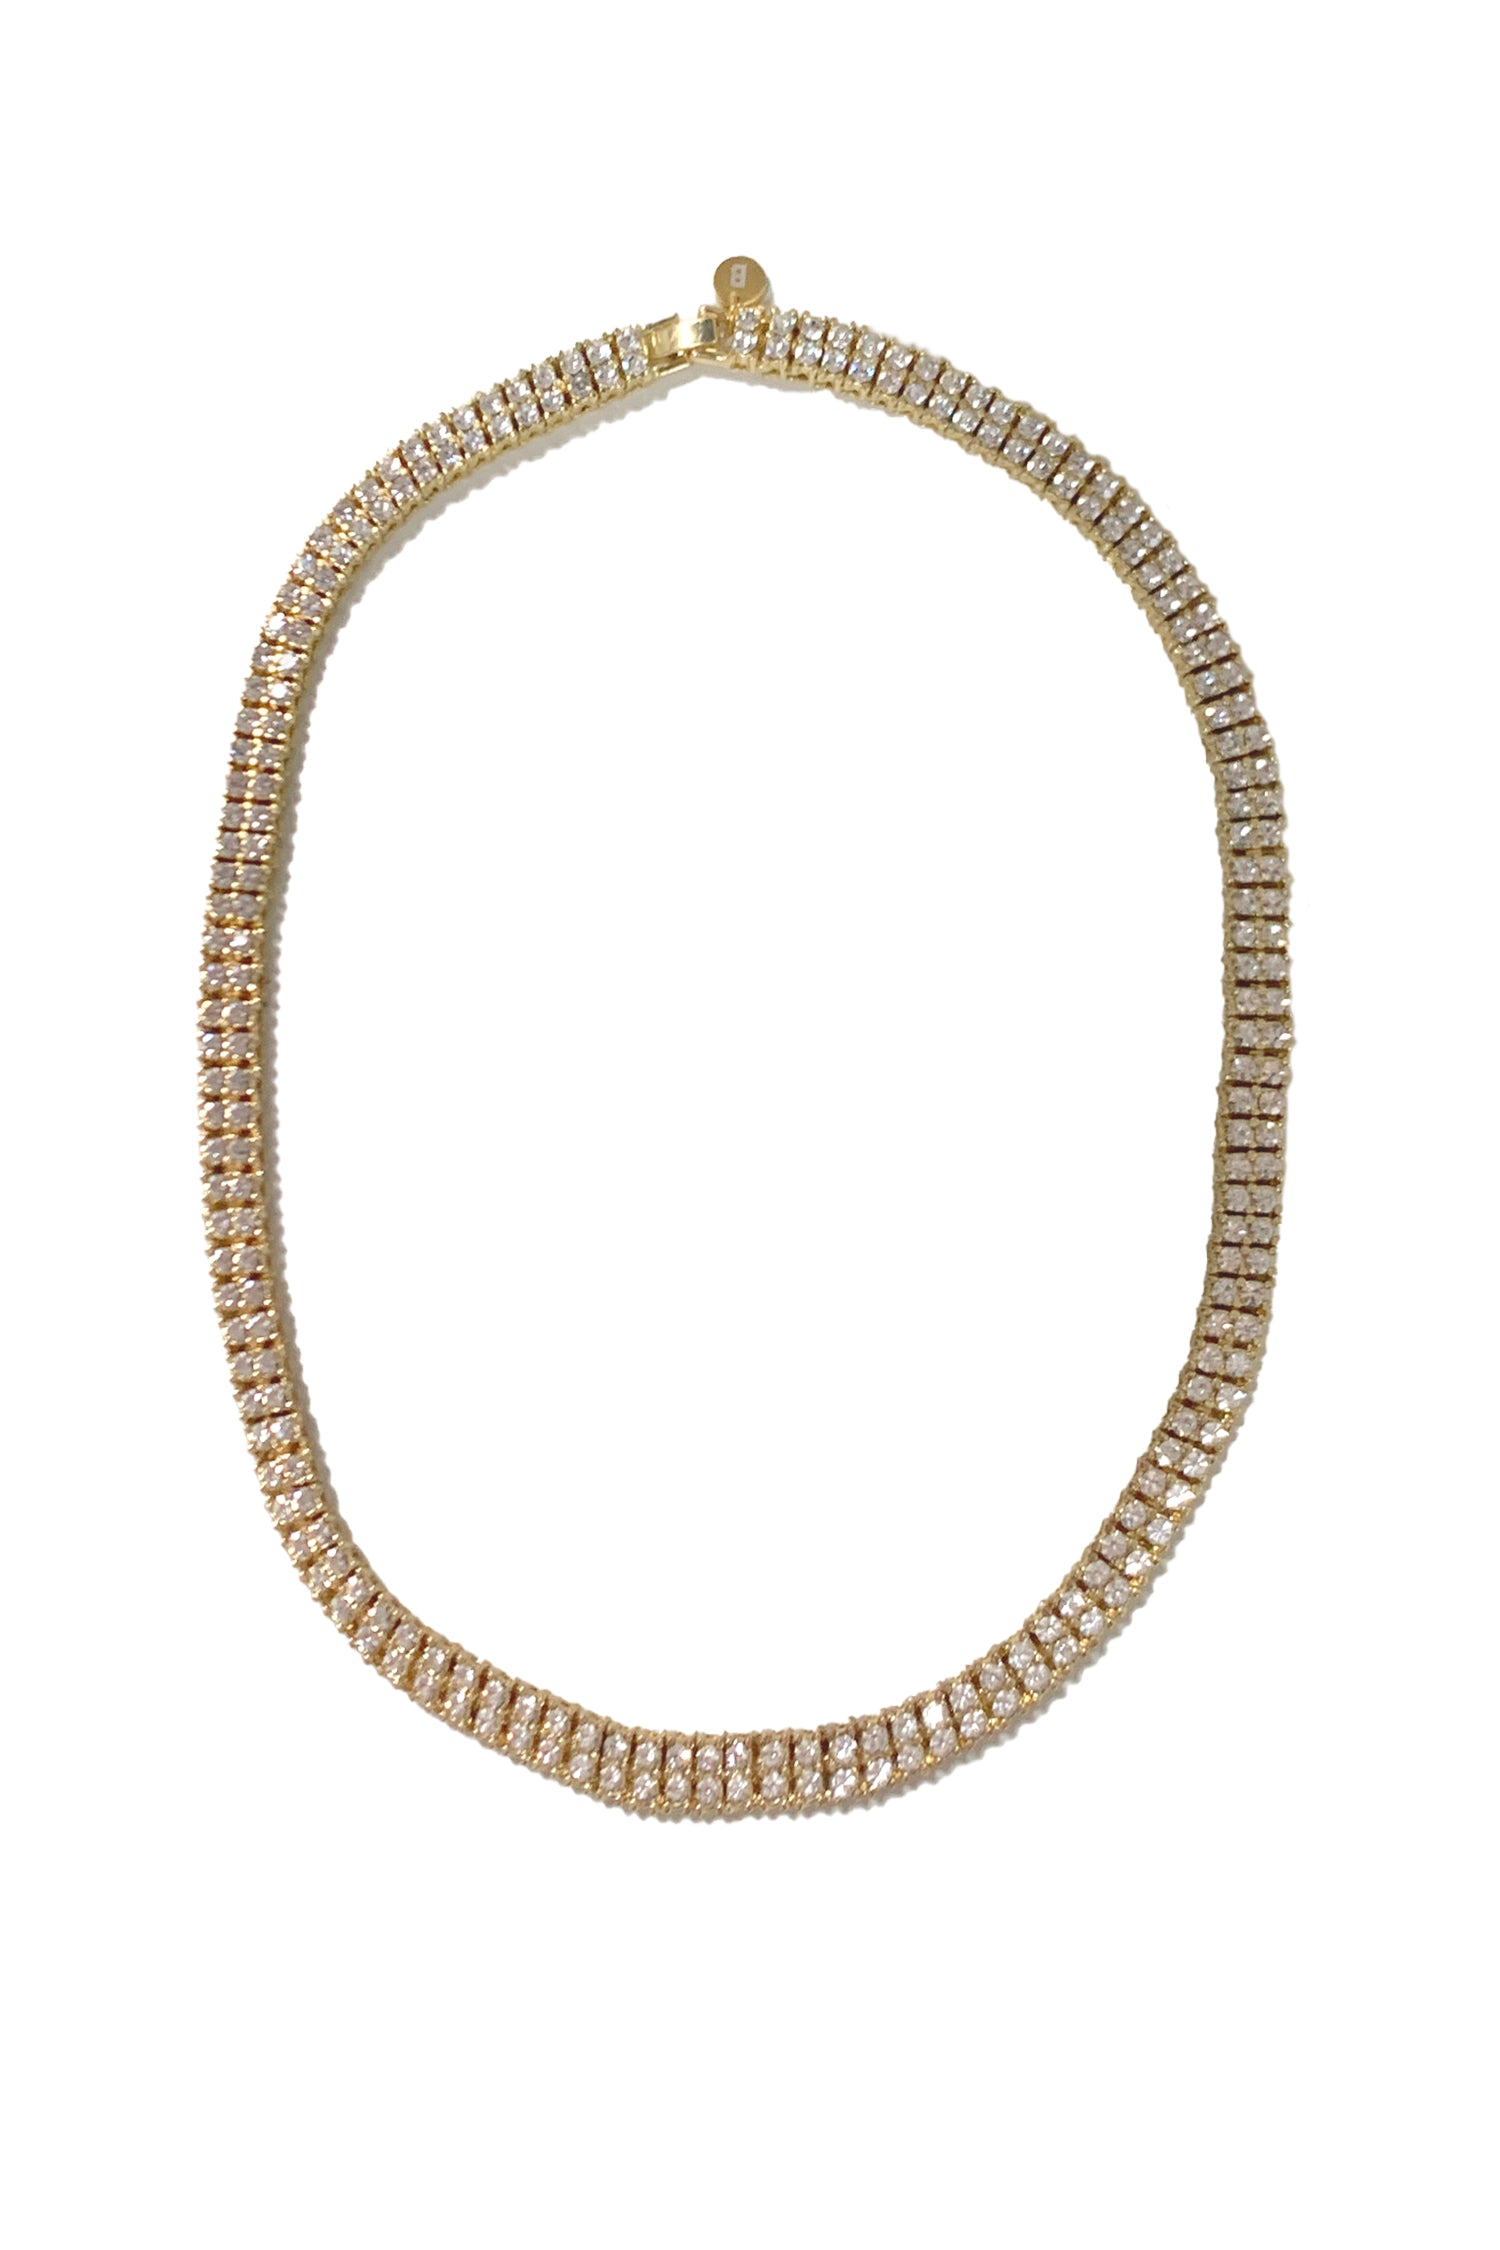 Always a classic and always in style - our Tennis Necklace - wear one or stack them high. Designed to match our tennis bracelets.   14k gold plated stainless steel with a double row of CZ crystals - will not tarnish and hypoallergenic. 